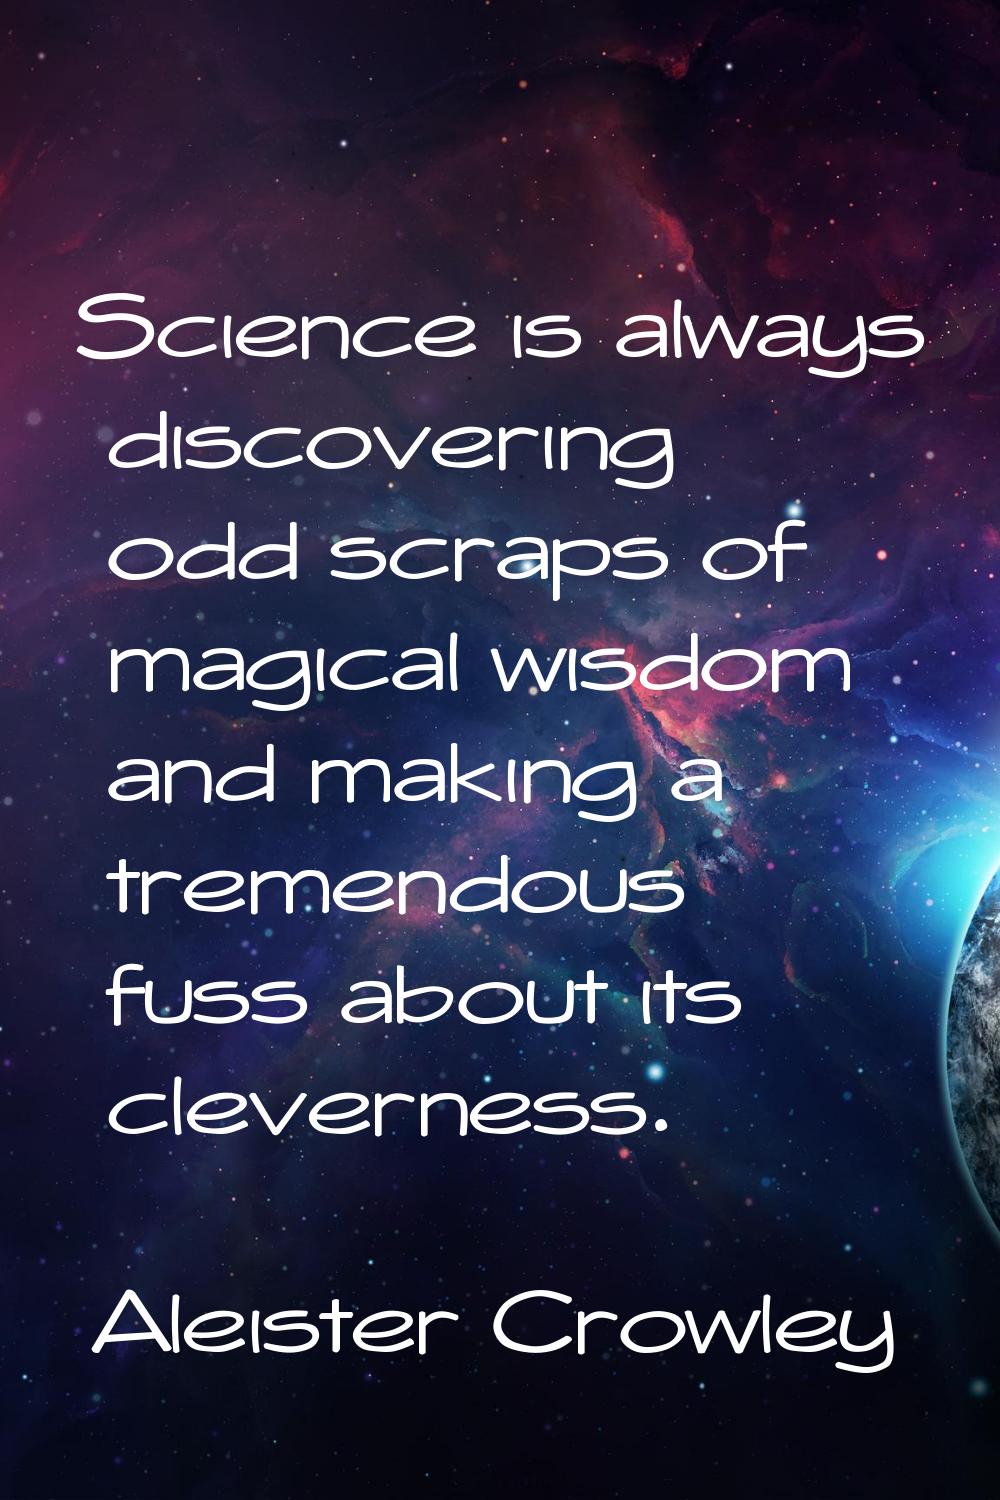 Science is always discovering odd scraps of magical wisdom and making a tremendous fuss about its c